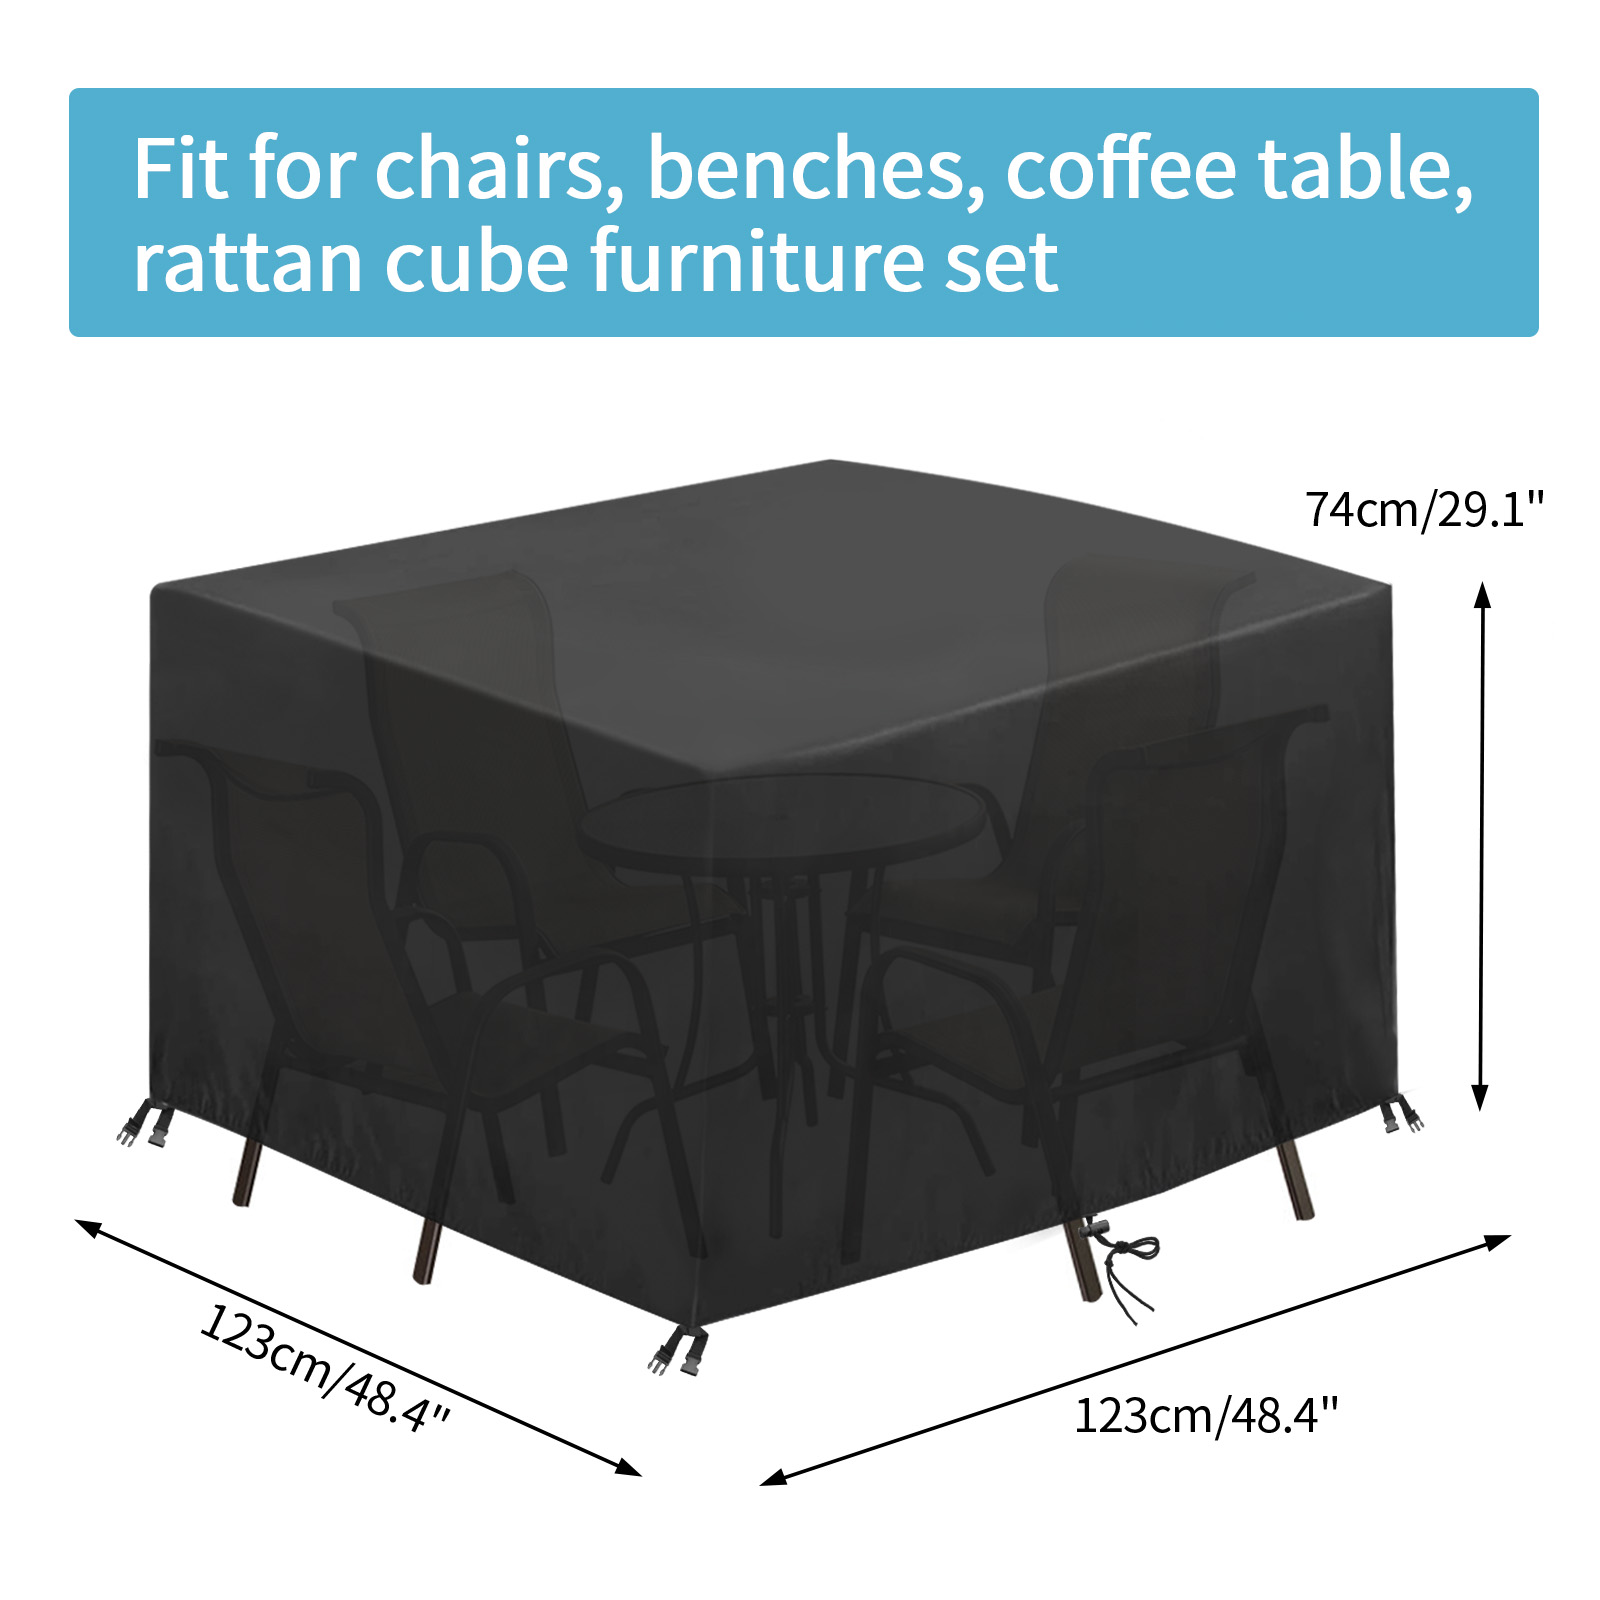 KING-DO-WAY-12512574CM-Cube-Garden-Furniture-Cover-Rattan-Table-Set-Cover-600D-Heavy-Duty-Oxford-Fab-1305017-2